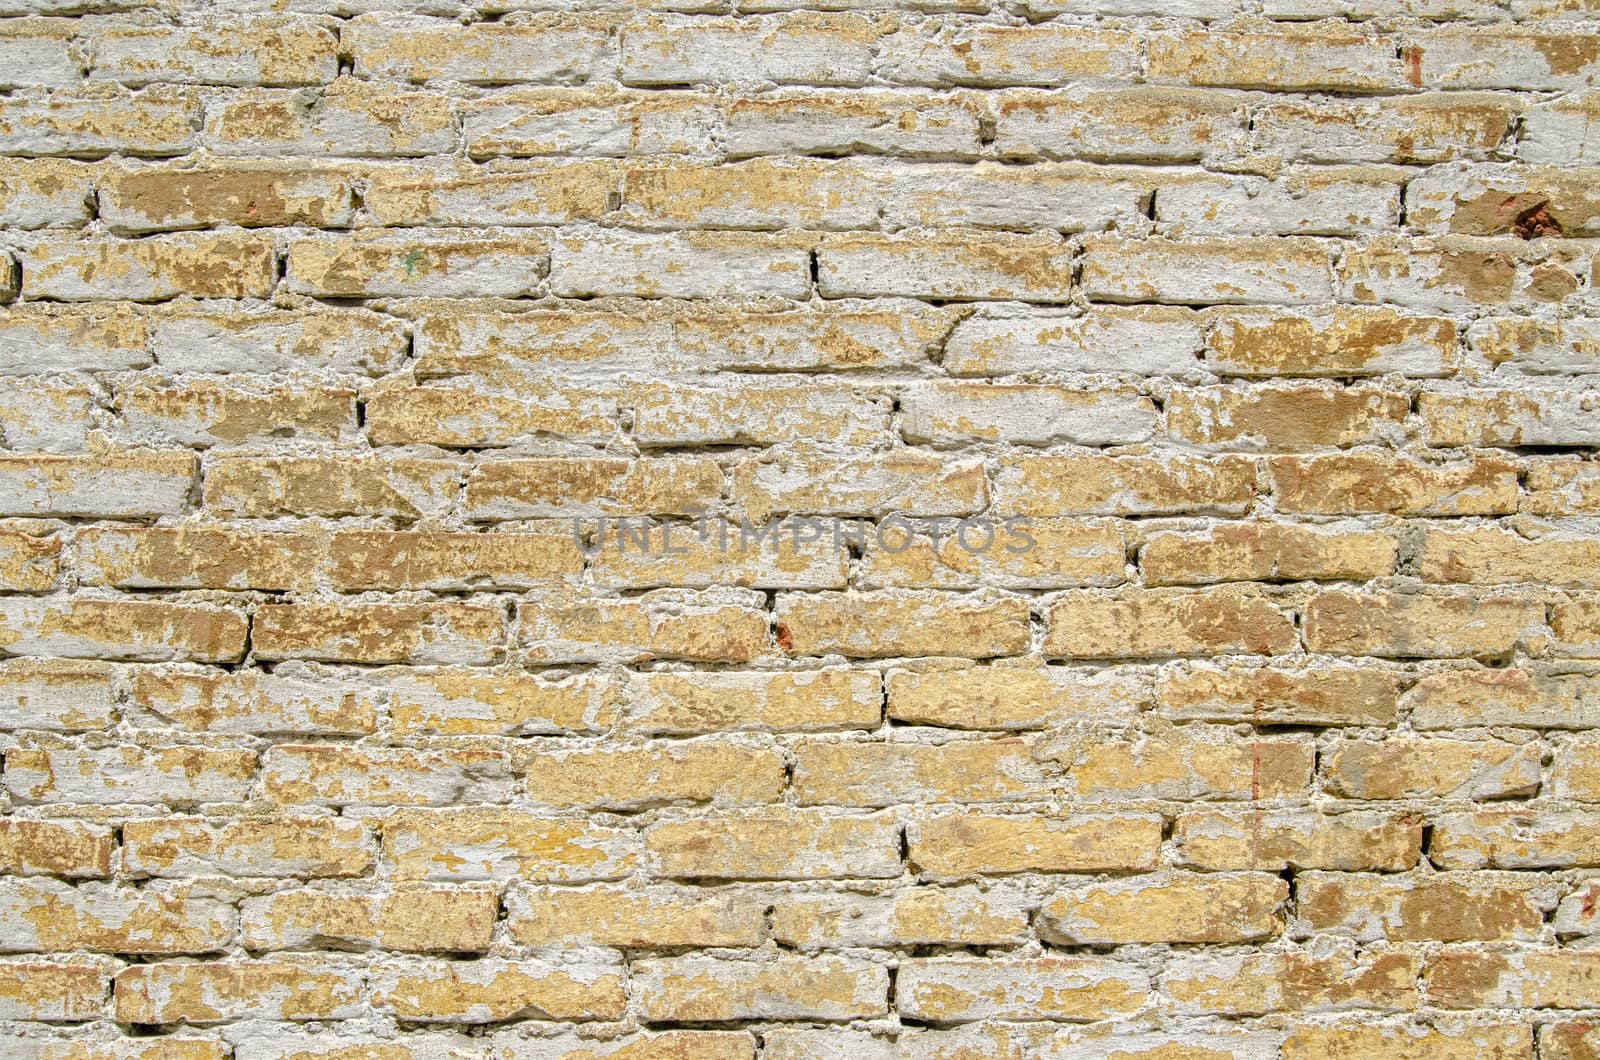 Weathered yellow brick wall with whitewash wearing off.  Historic wall at Forte Marghera, Mestre, Veneto.  